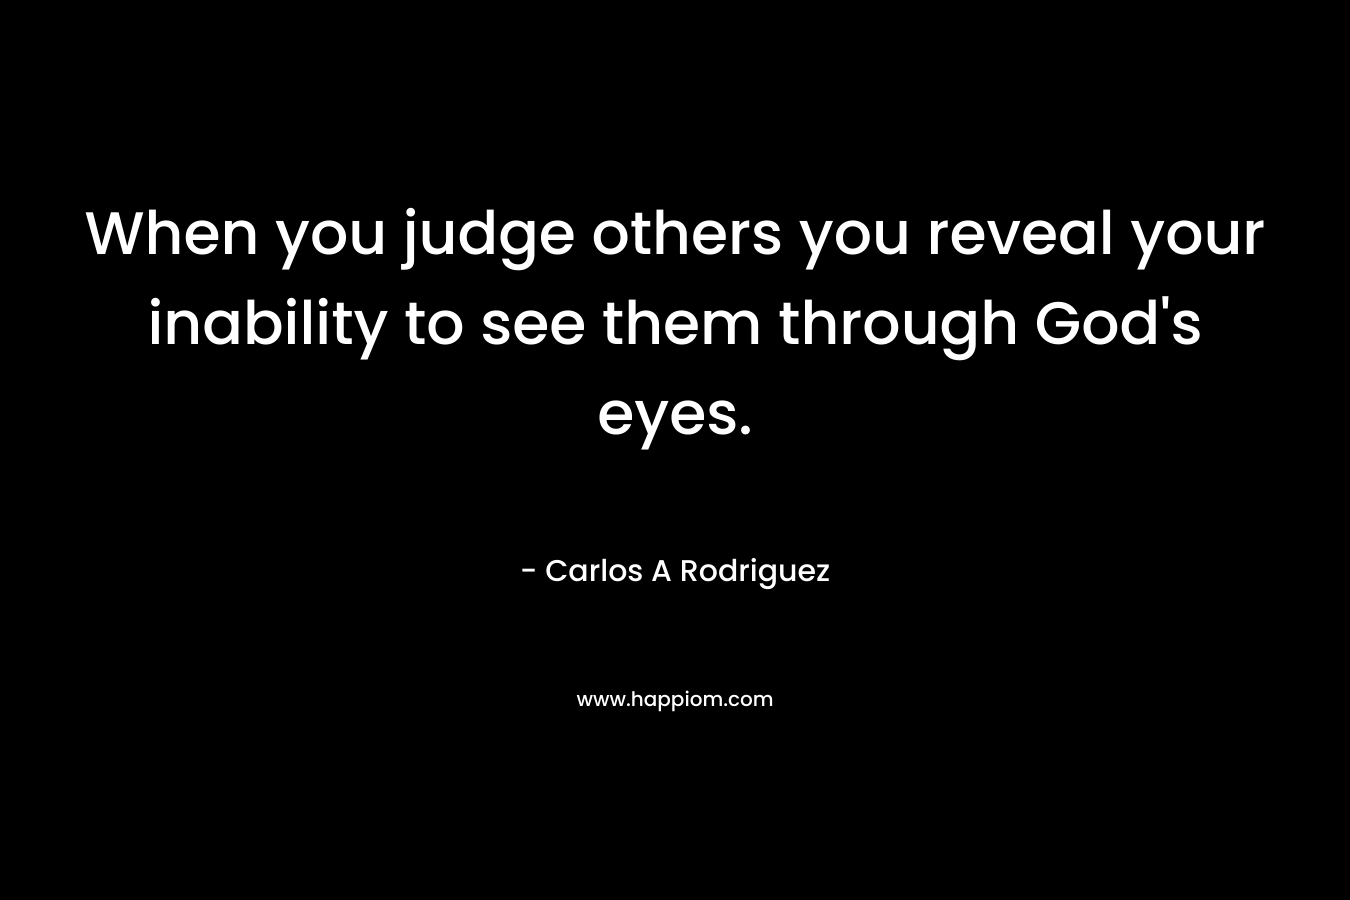 When you judge others you reveal your inability to see them through God's eyes.